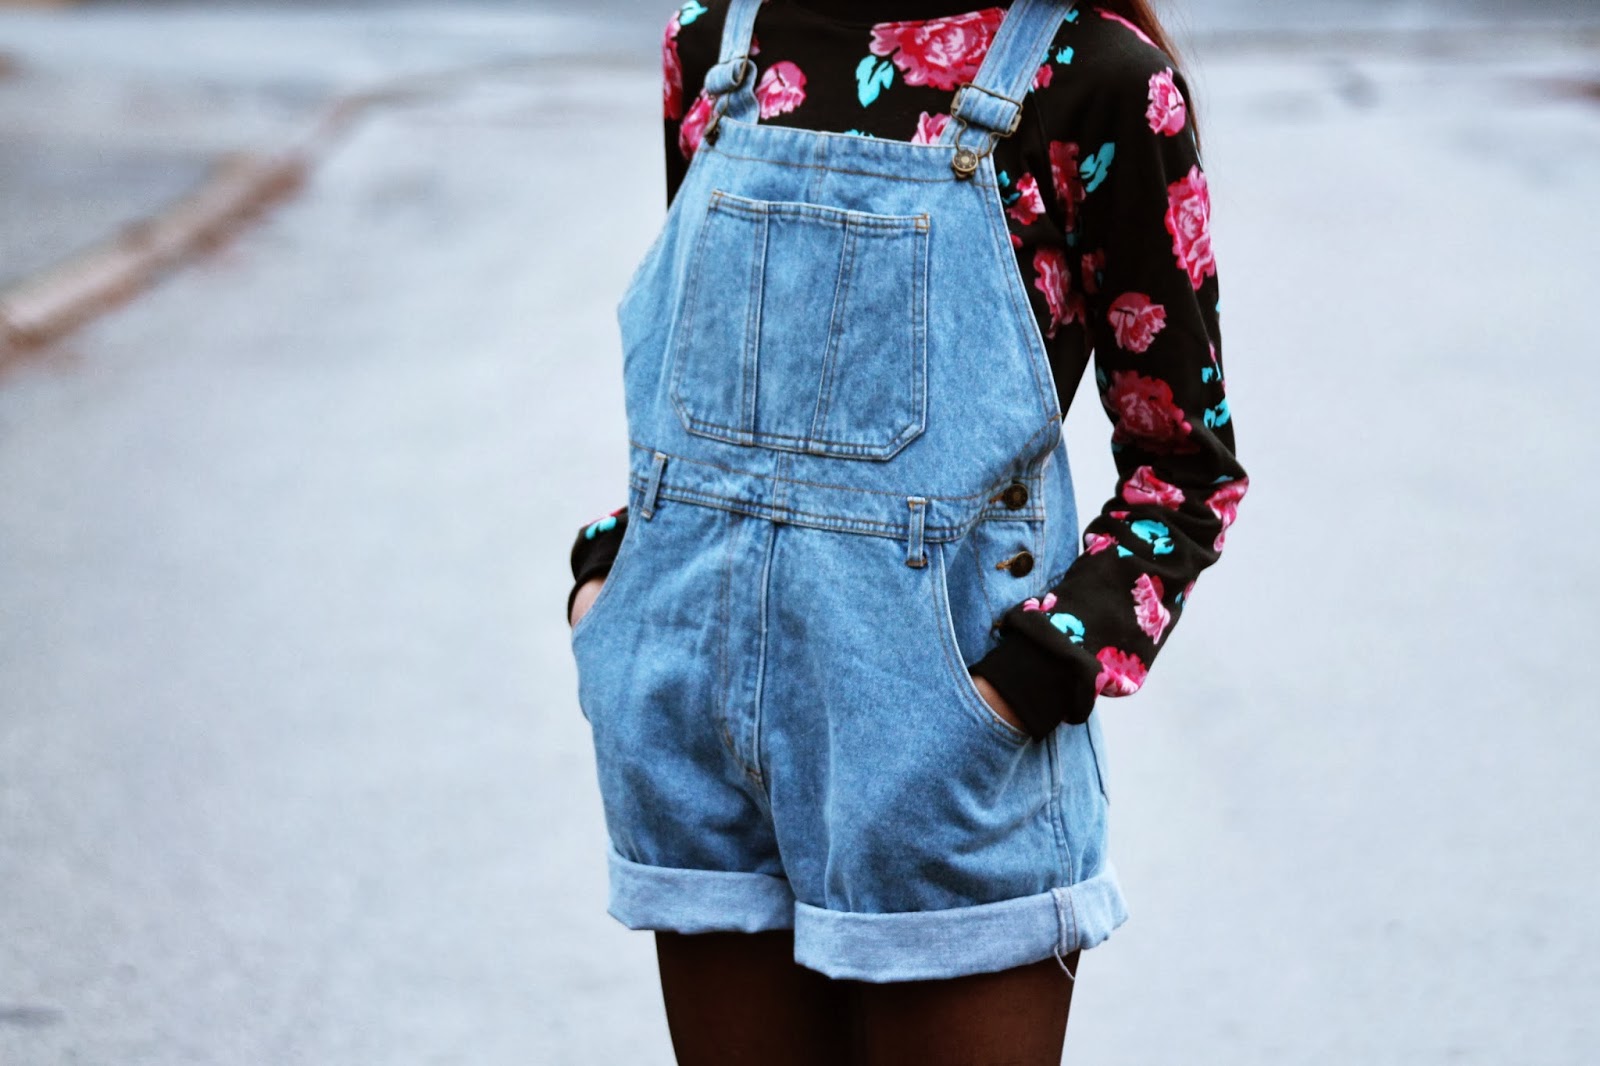 Malin E. - Thrift Store Dungarees, H&M Hat, Creepers - Surrounded by ...